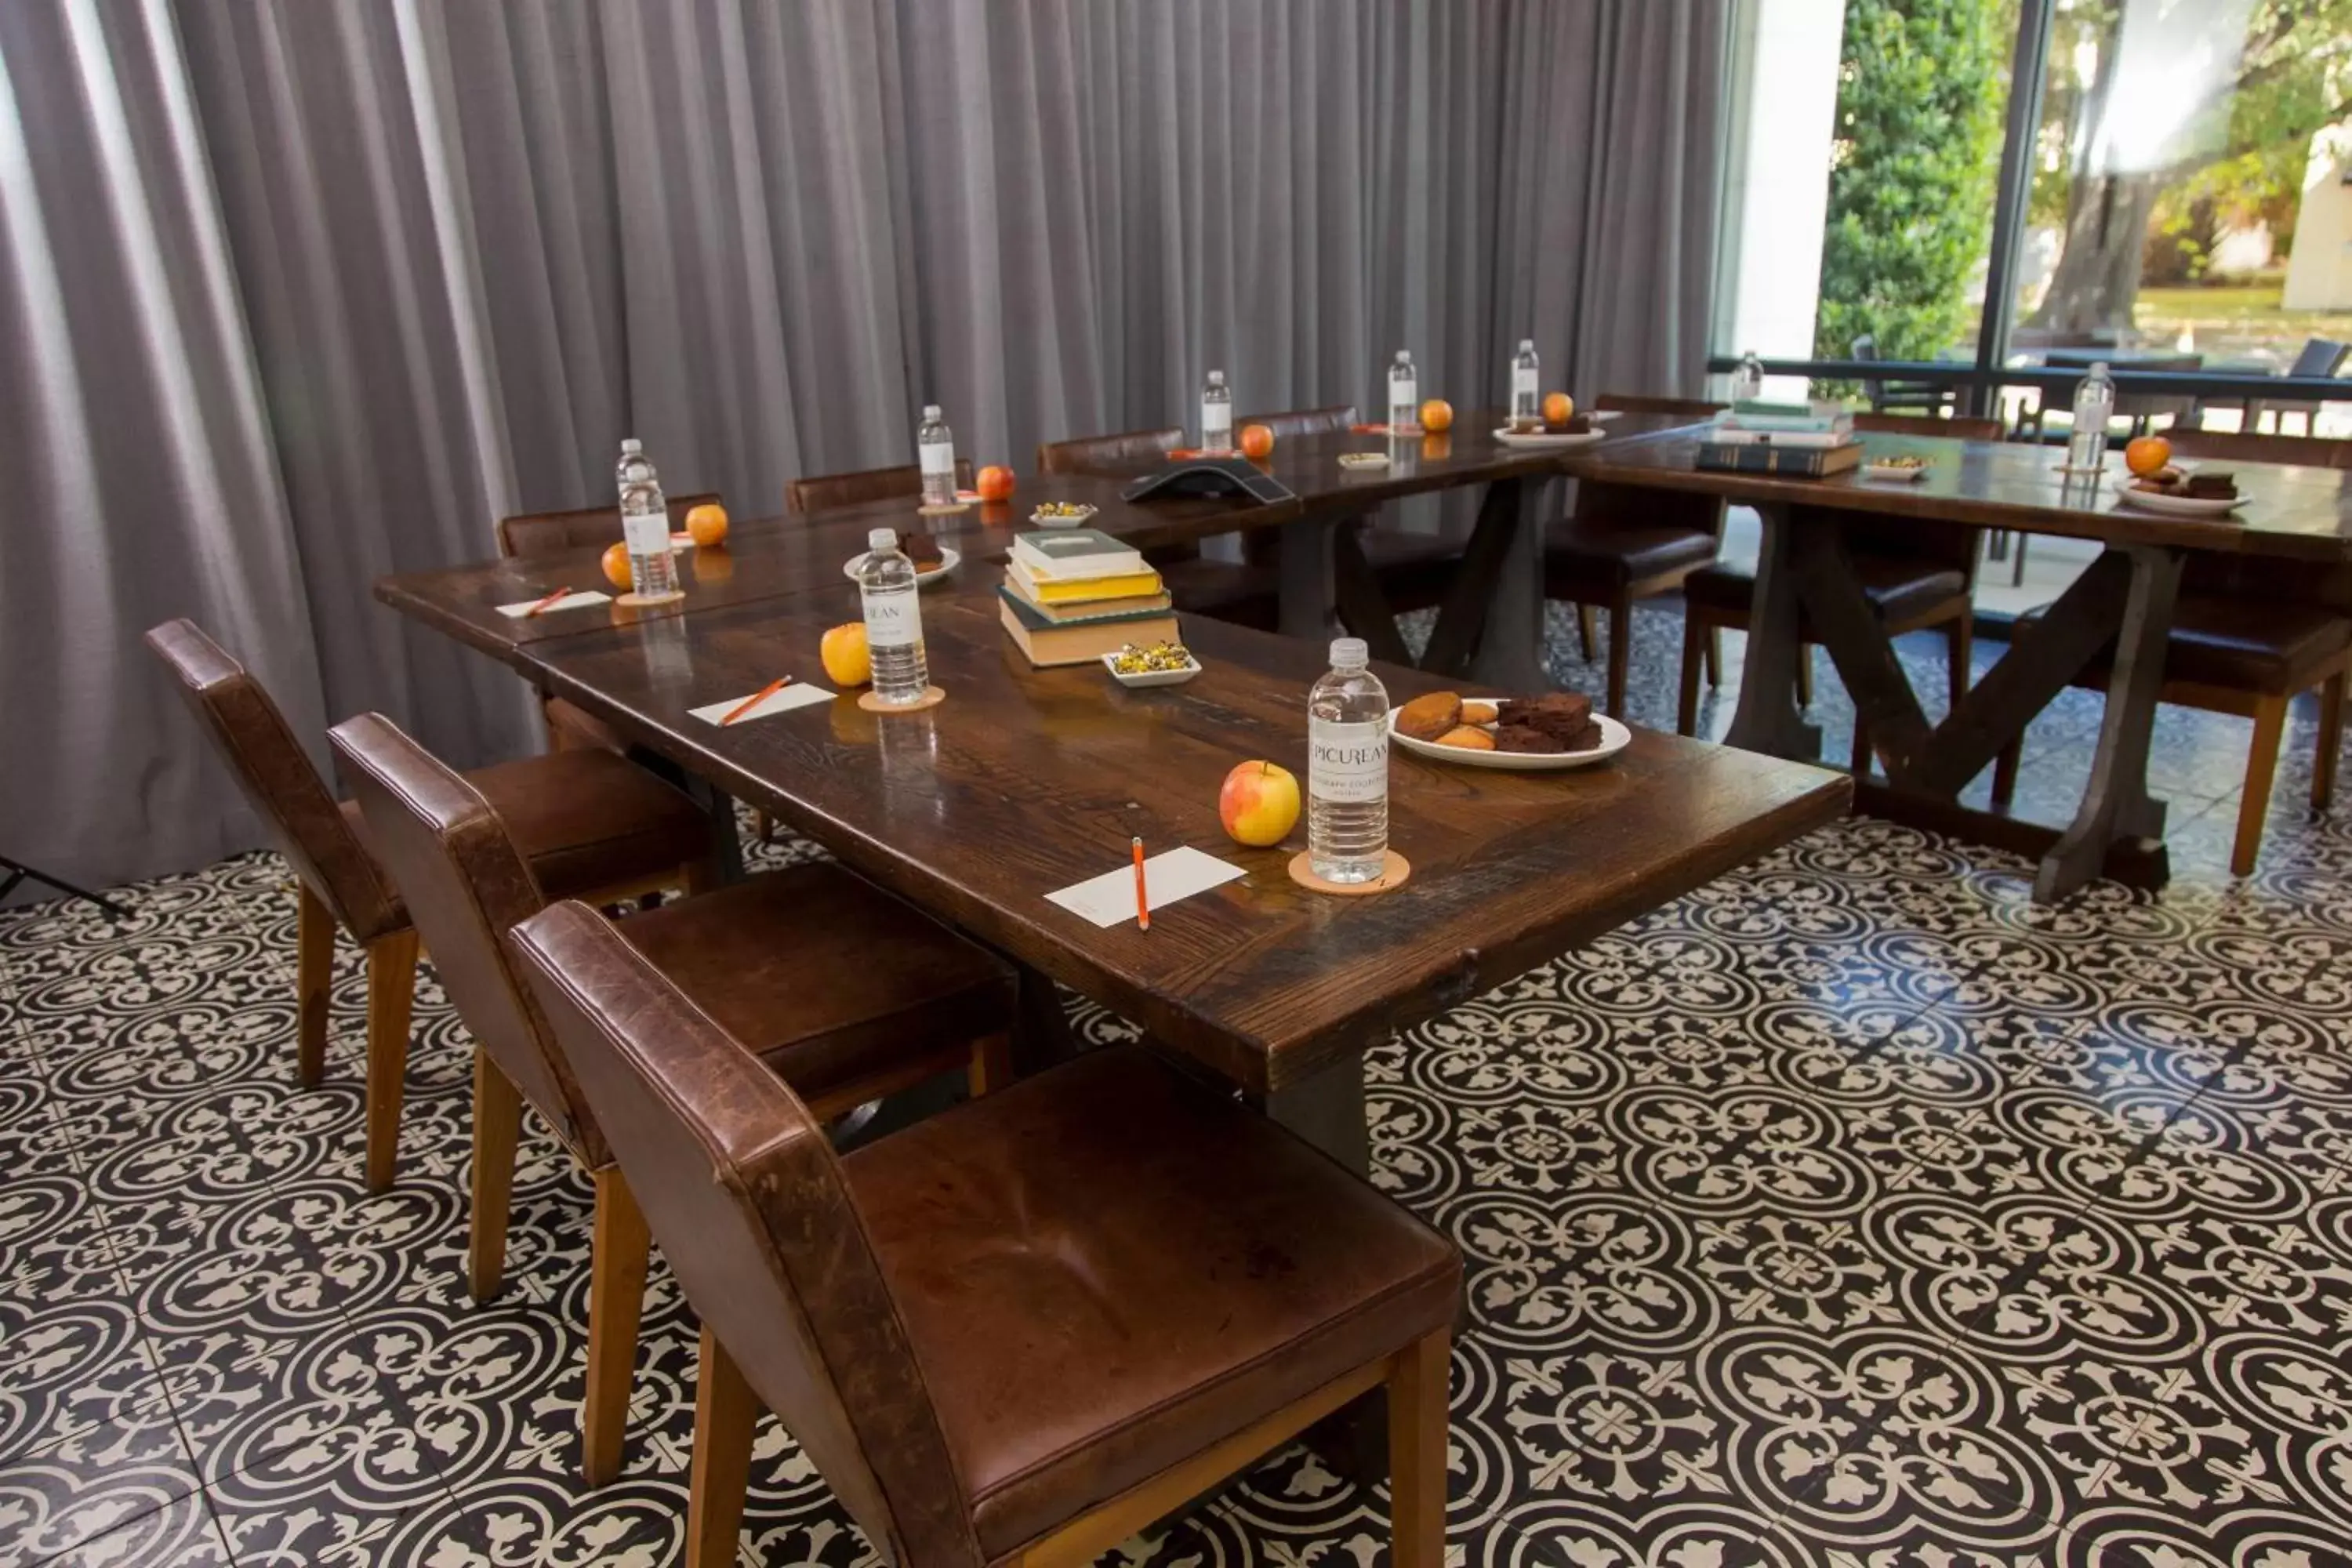 Meeting/conference room in Epicurean Hotel, Autograph Collection